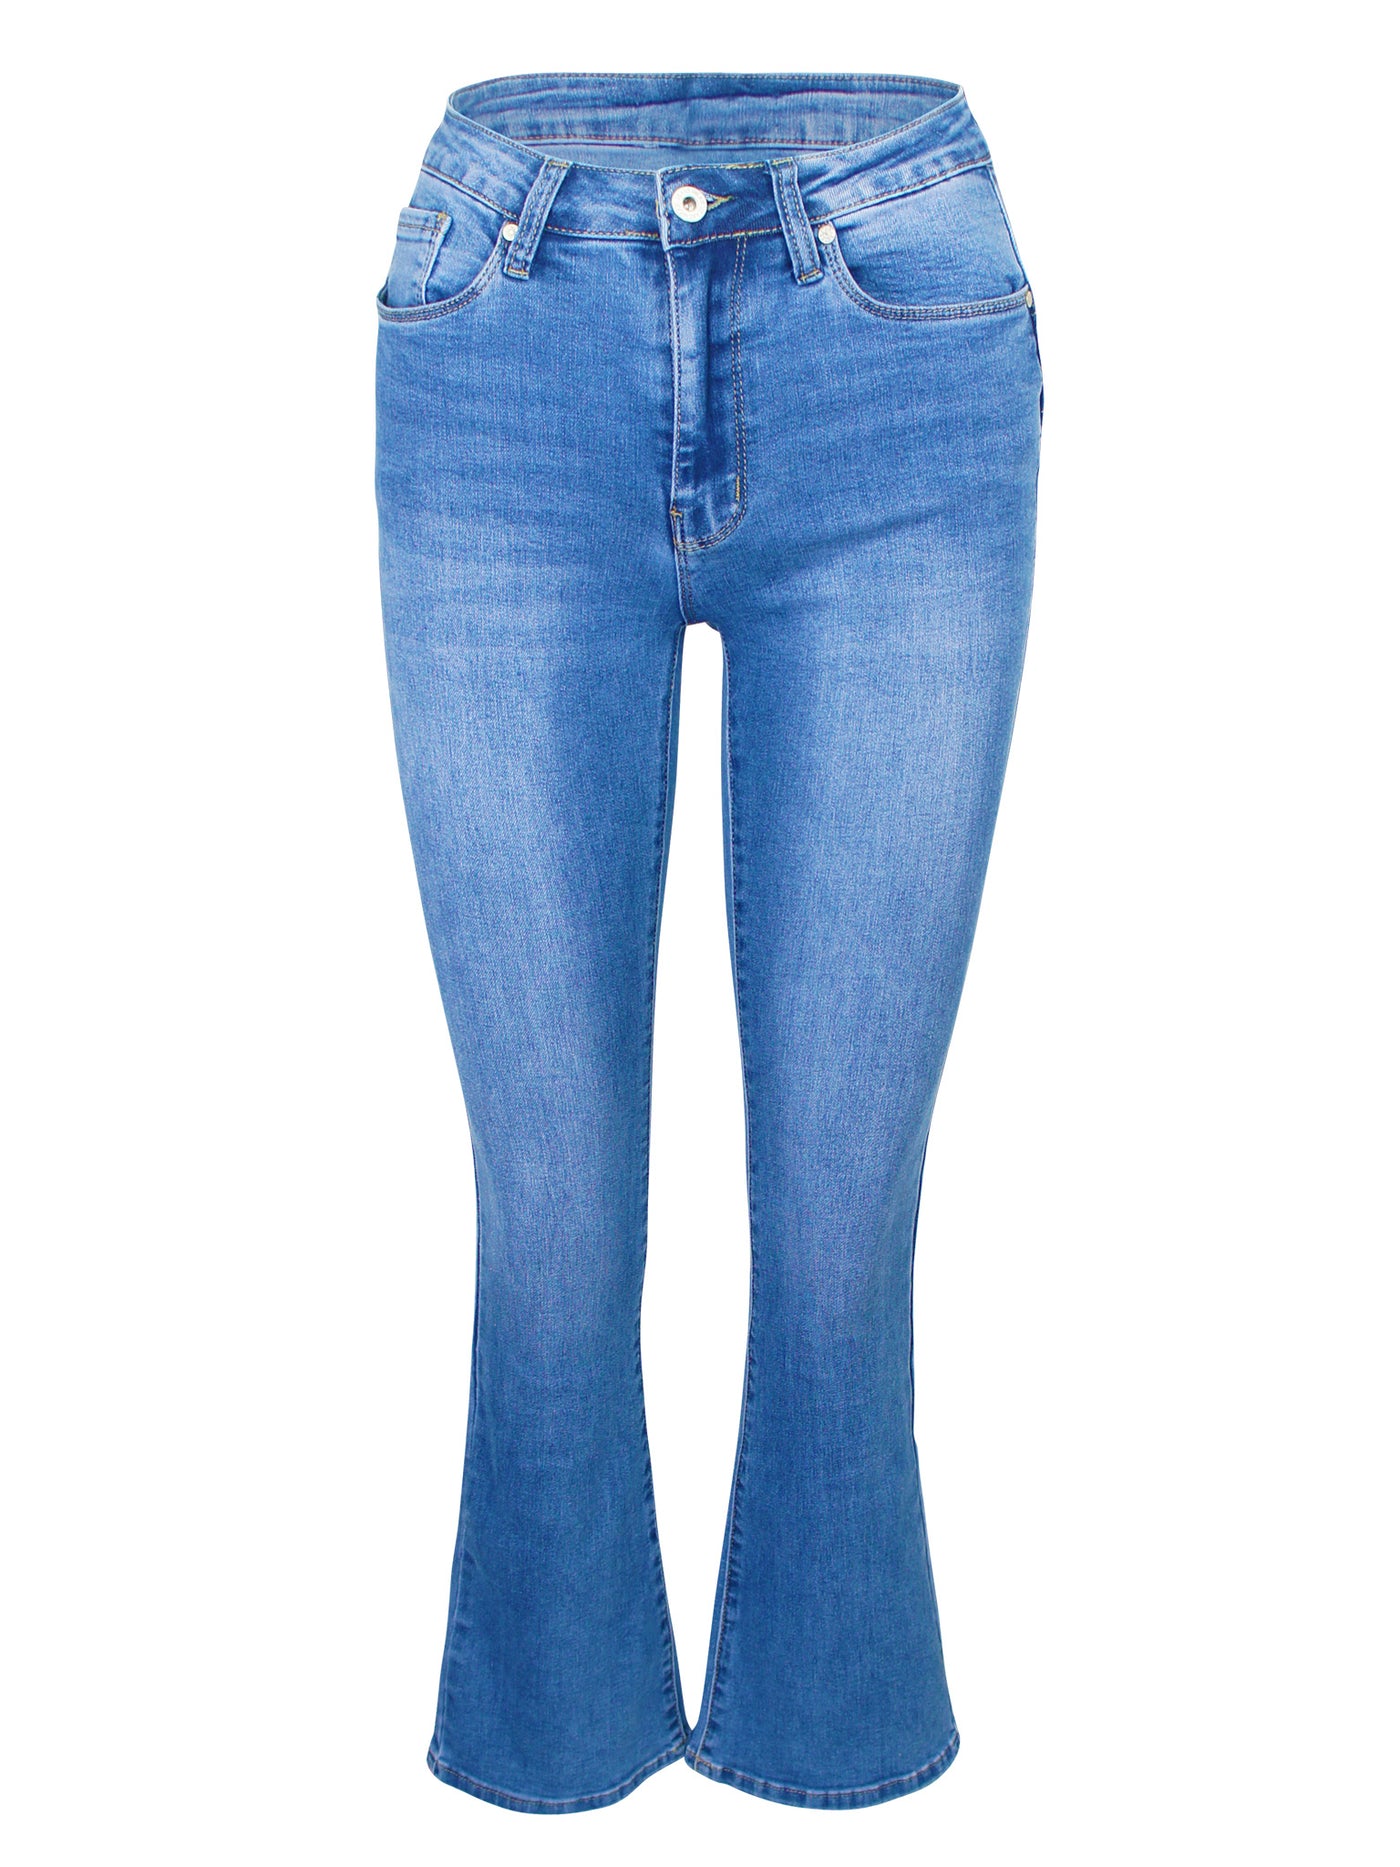 Stretch Jeans Flared Blue